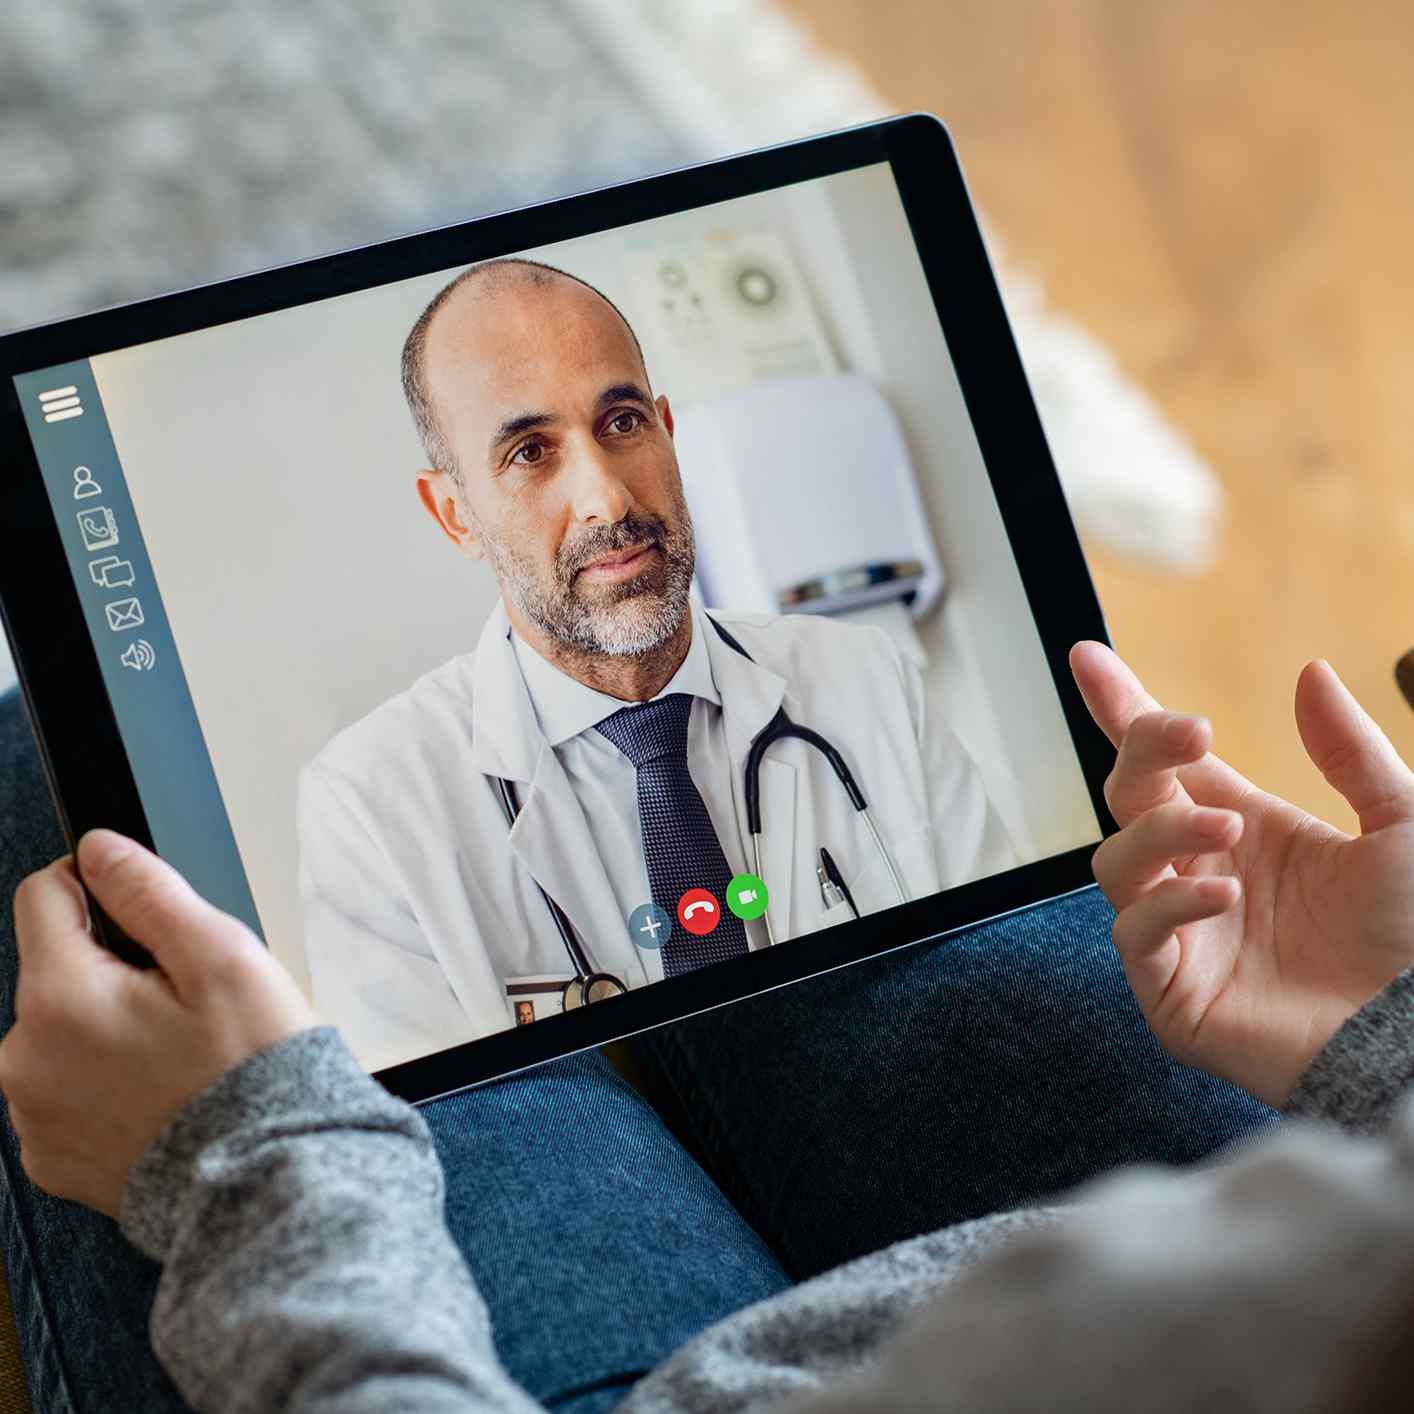 Telehealth in the Time of COVID-19